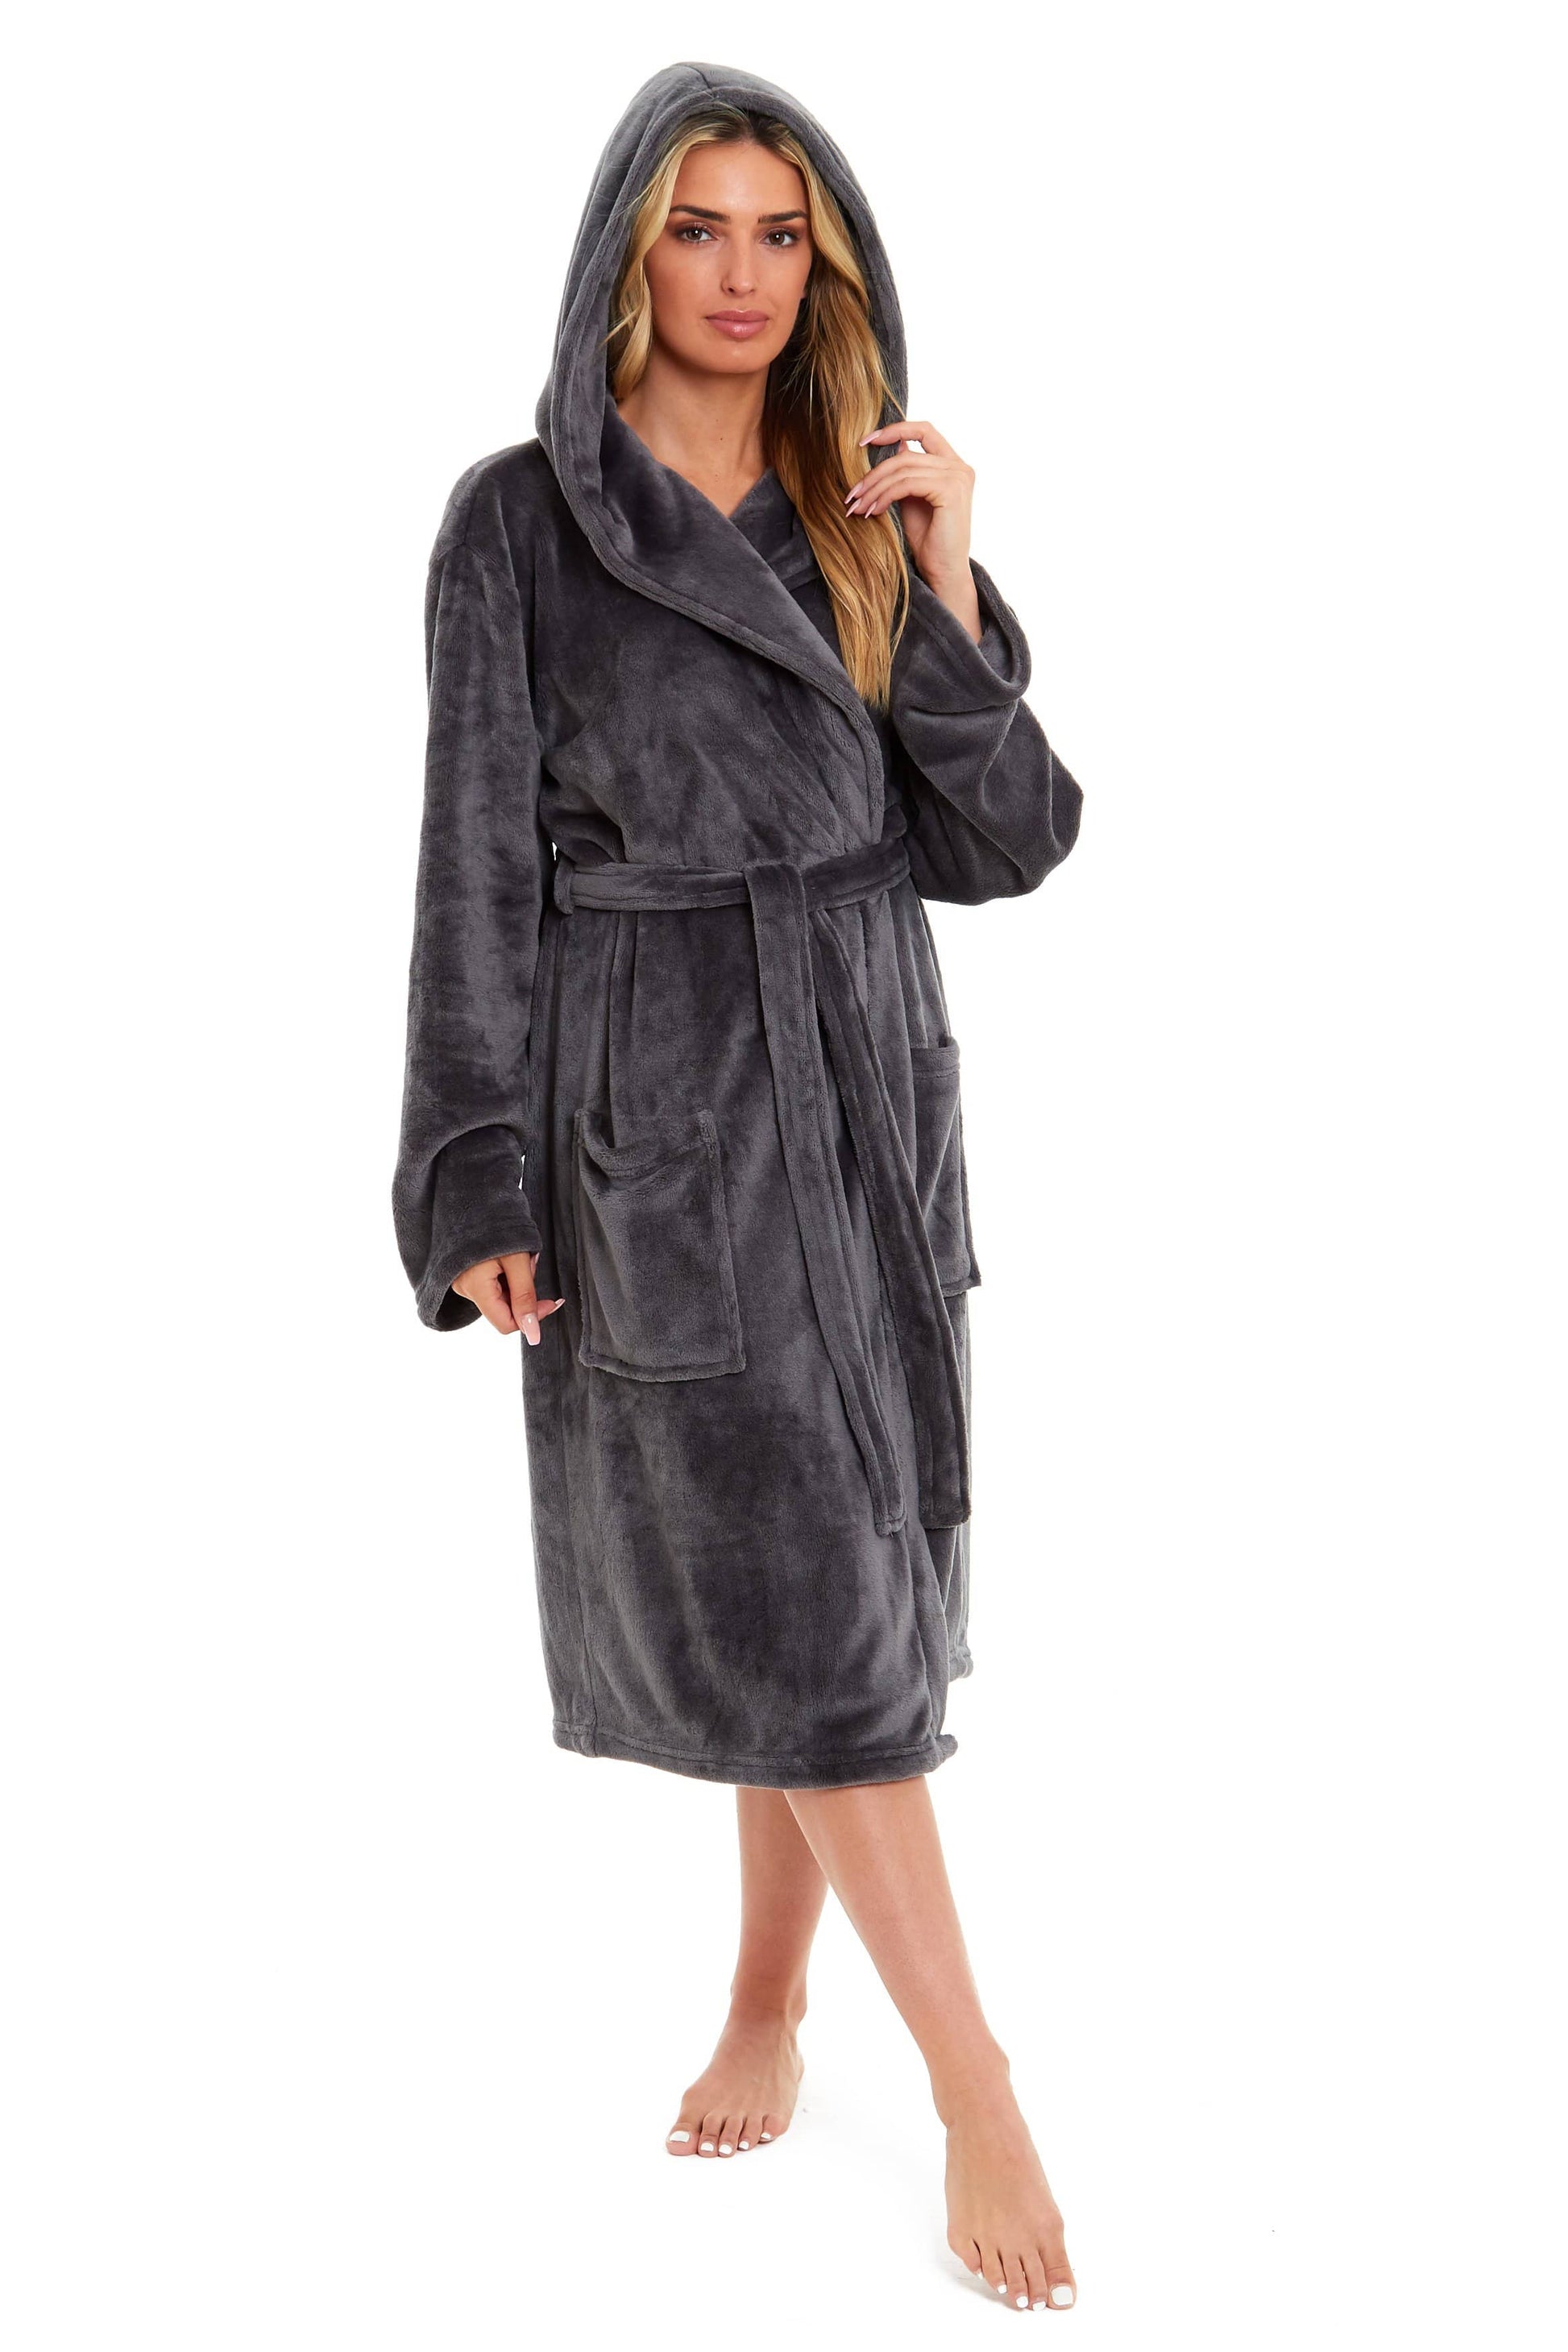 Super Soft Plush Fleece Hooded Dressing Gown SMALL | UK 8-10 / CHARCOAL Daisy Dreamer Dressing Gown